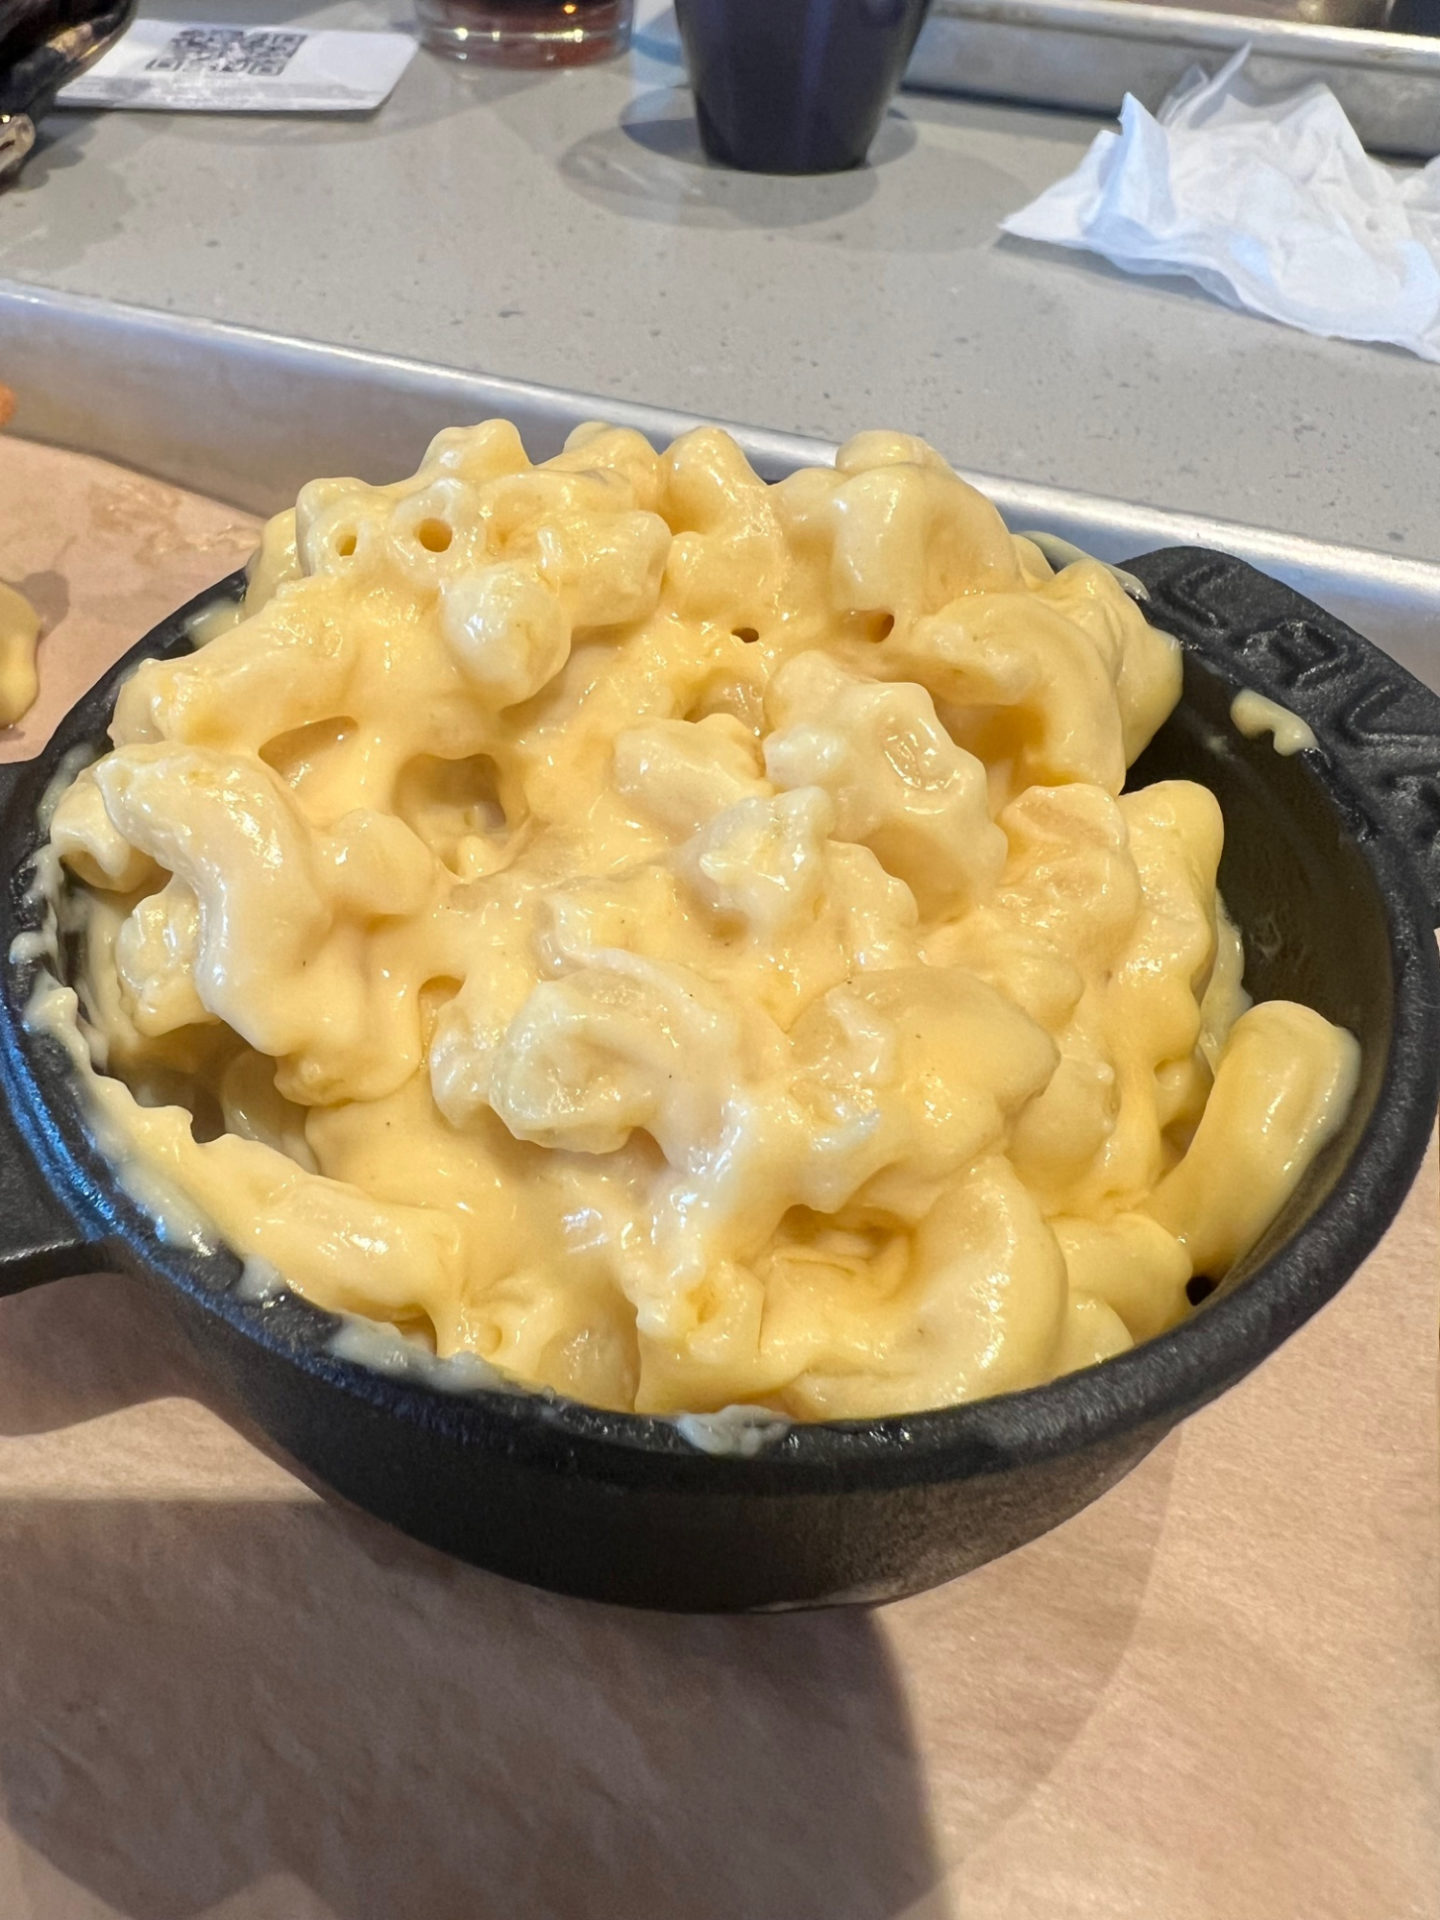 A black cup of macaroni and cheese.